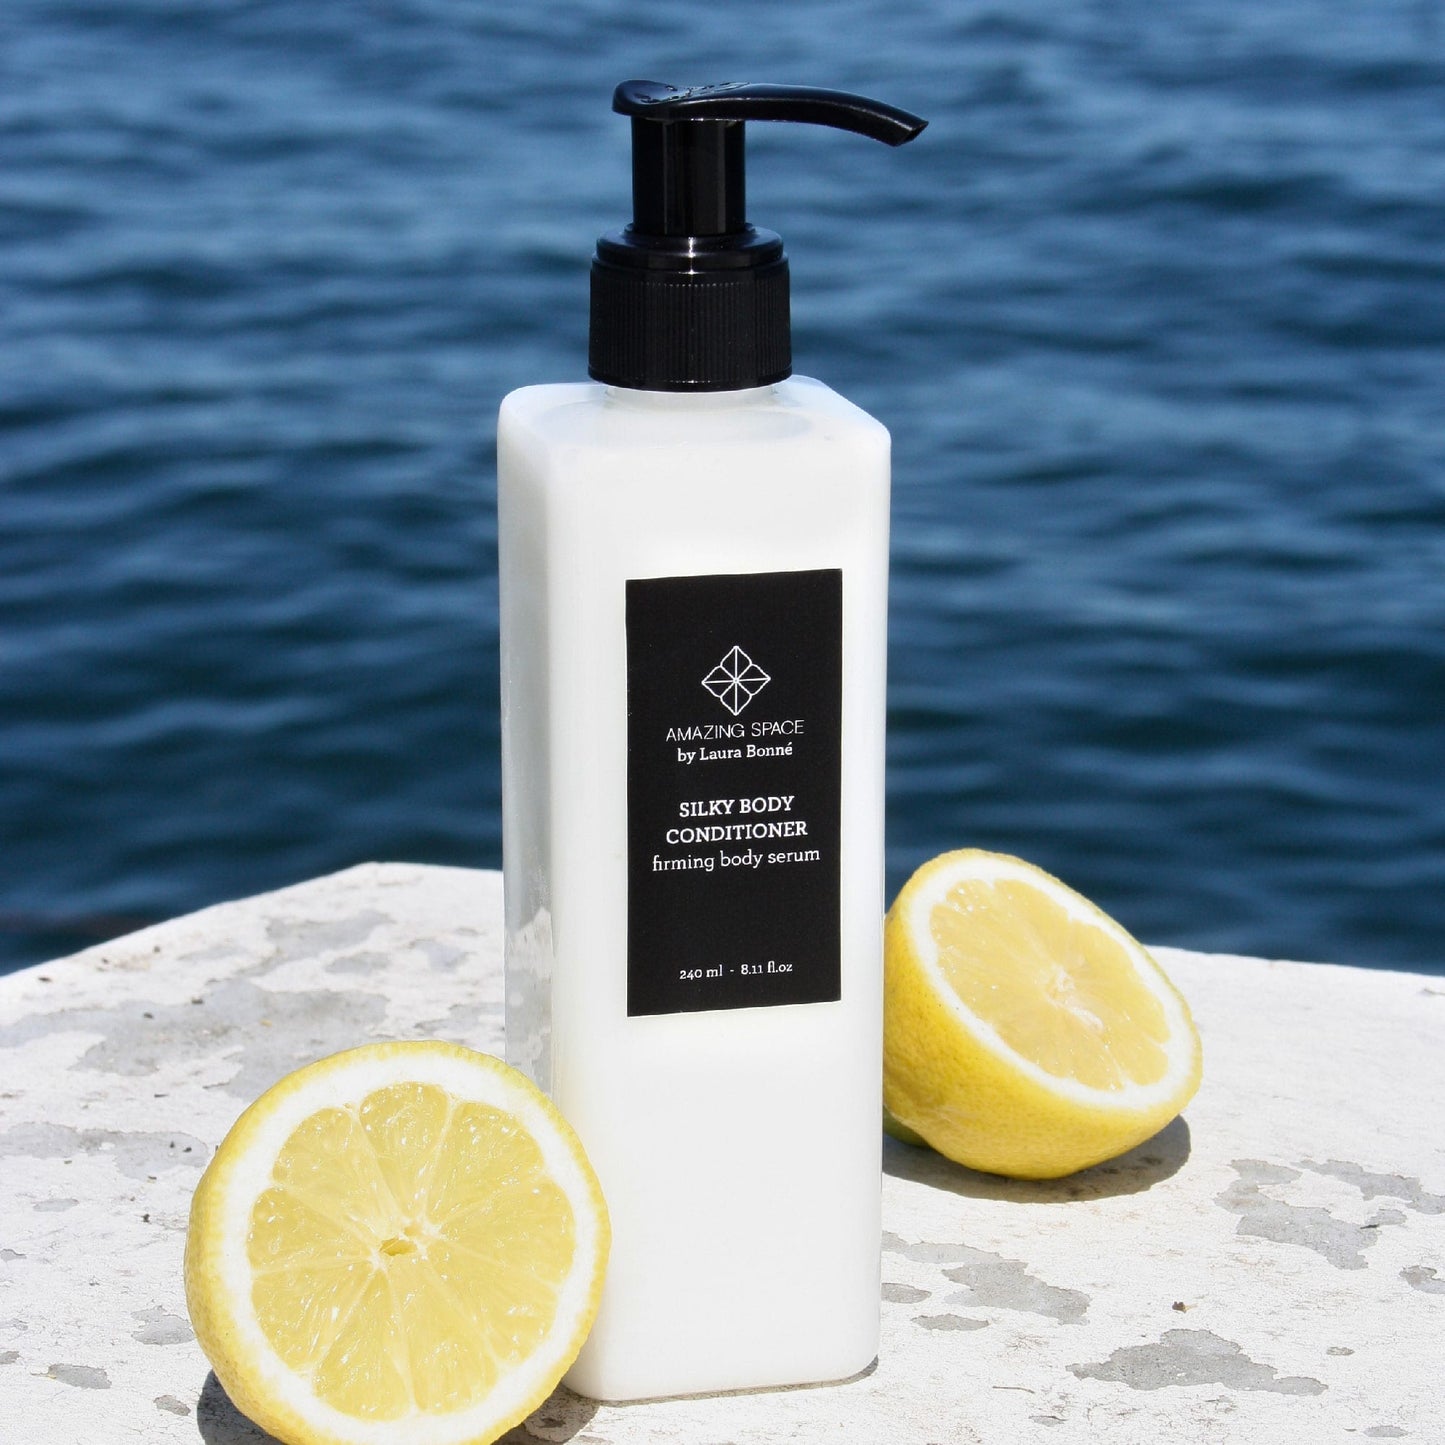 Silky Body Conditioner - Lime & ginger body serum